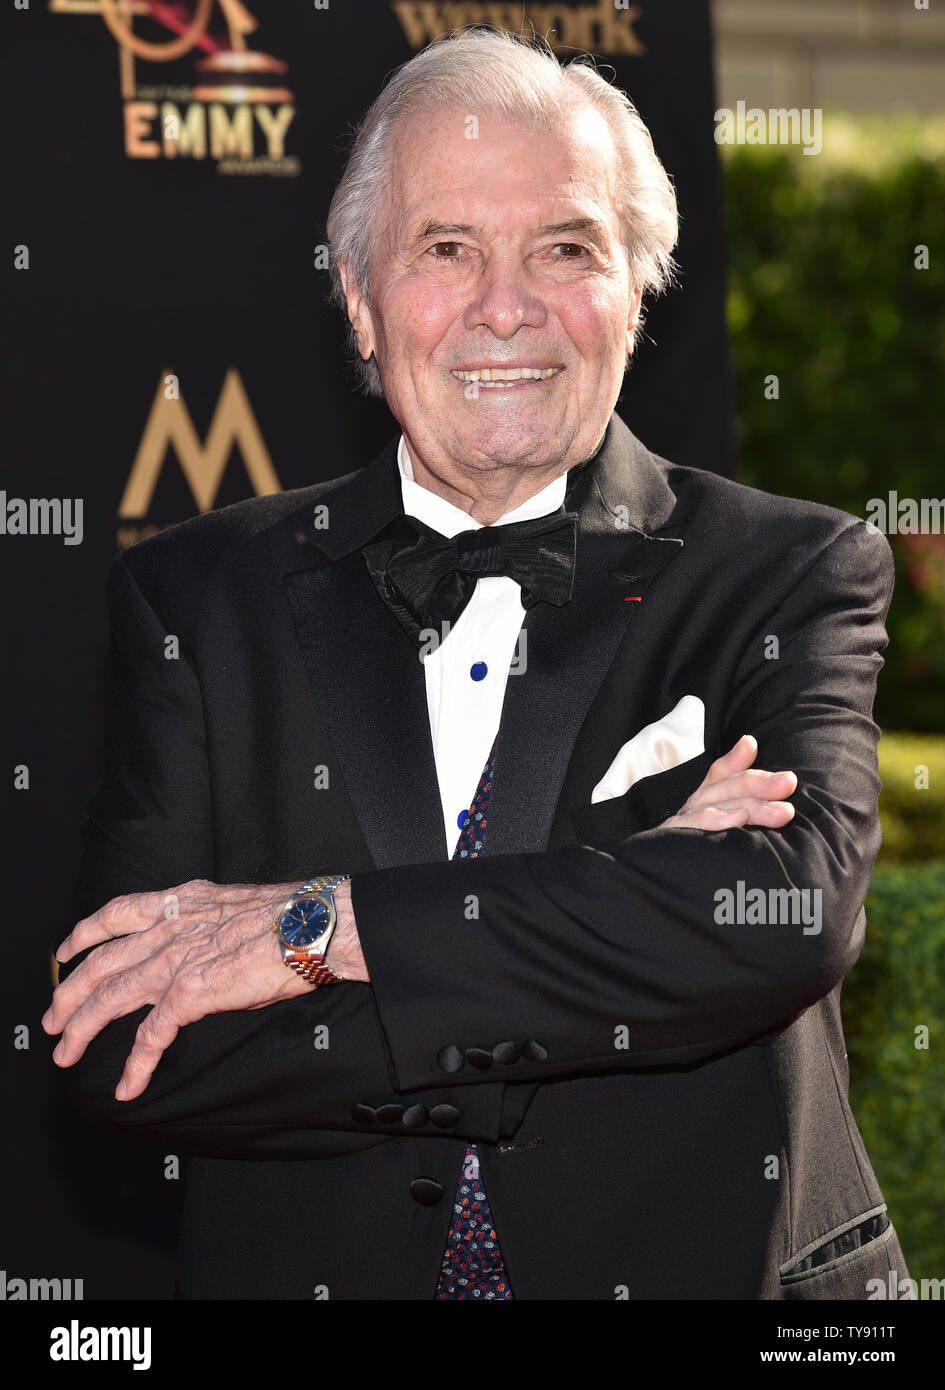 Lifetime Achievement Award recipient Chef Jacques Pepin arrives on the red carpet for the 46th Annual Daytime Creative Arts Emmy Awards at the Pasadena Civic Auditorium in Pasadena, California on May 3, 2019. Photo by Chris Chew/UPI Stock Photo